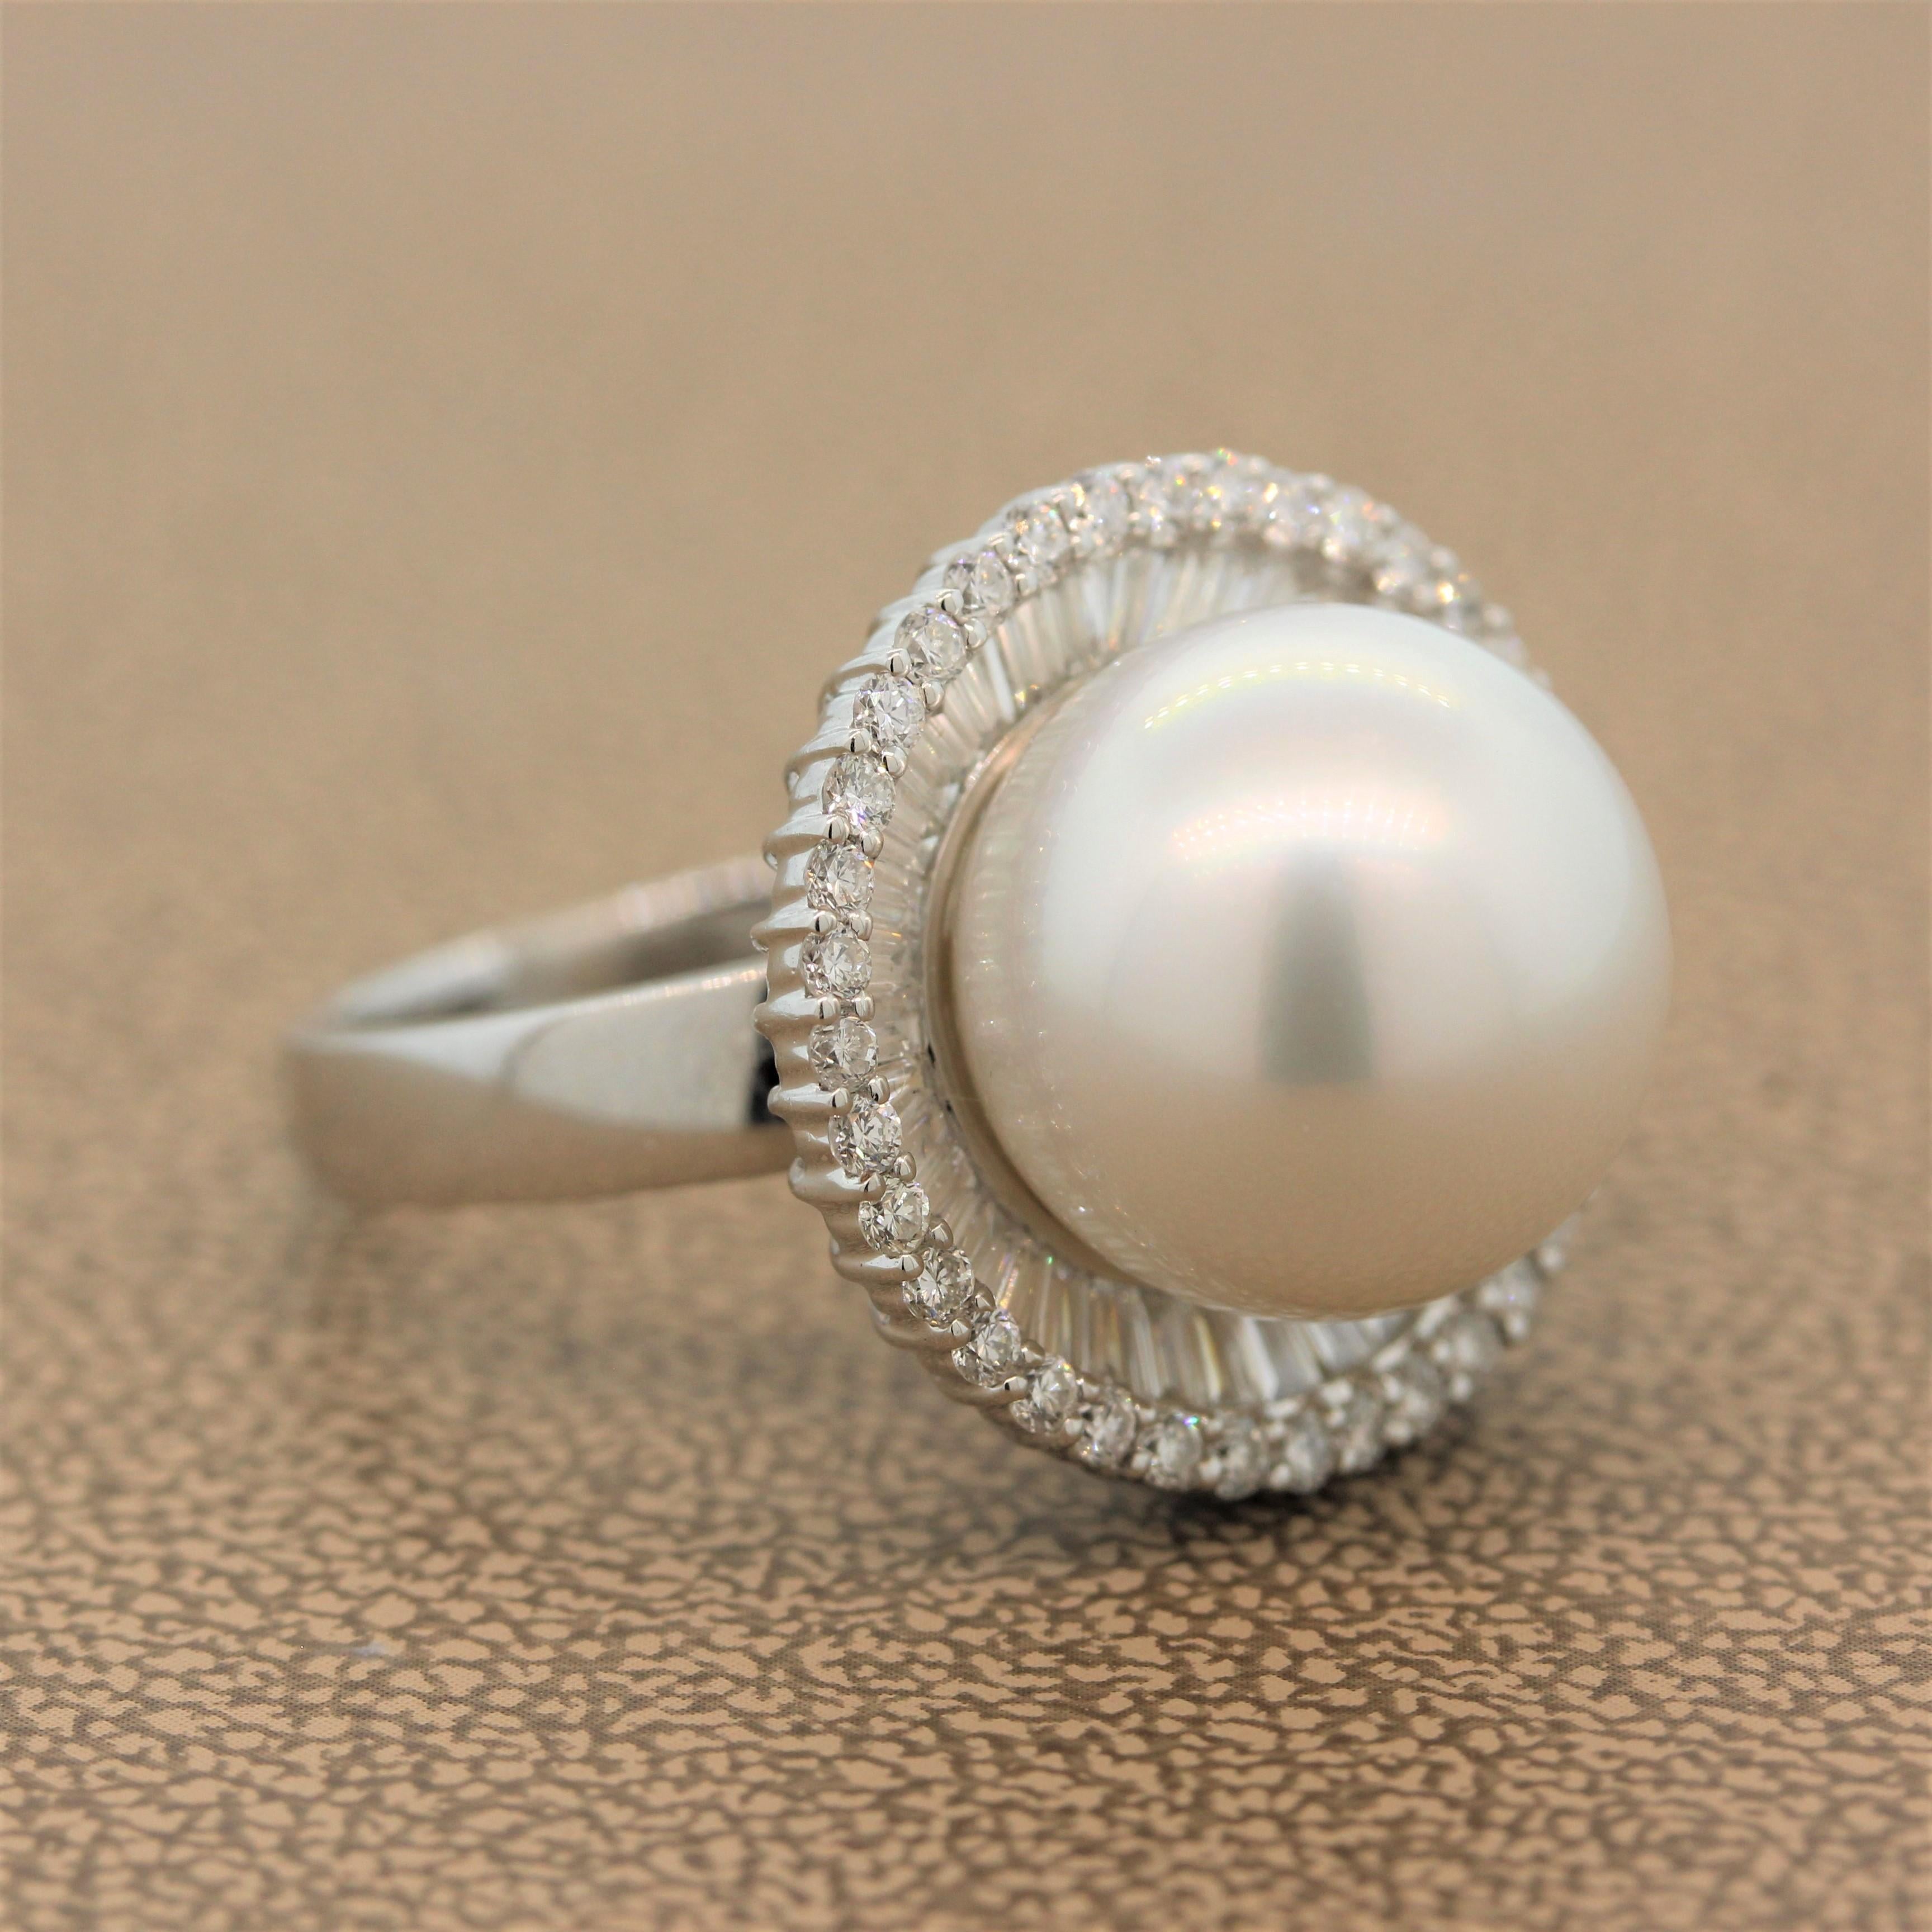 A modern ring featuring a 14.5mm South Sea pearl in a double halo of 1.49 carats of baguette cut diamonds and round cut diamonds. This everyday modest cocktail ring is set in 18K white gold.

Ring Size 6.75 (Sizable)
